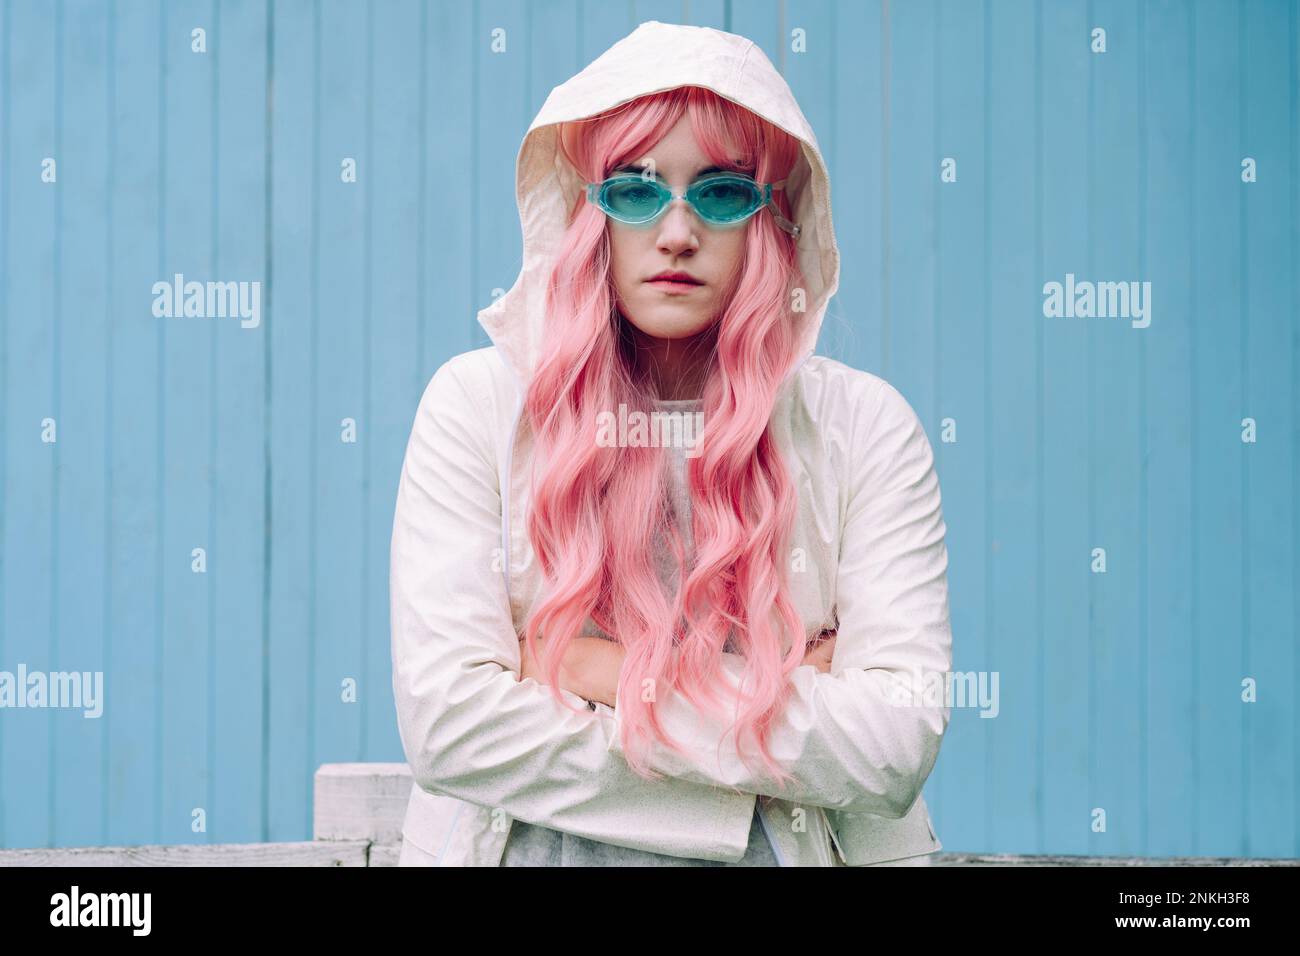 Woman with pink hair standing in front of wall Stock Photo